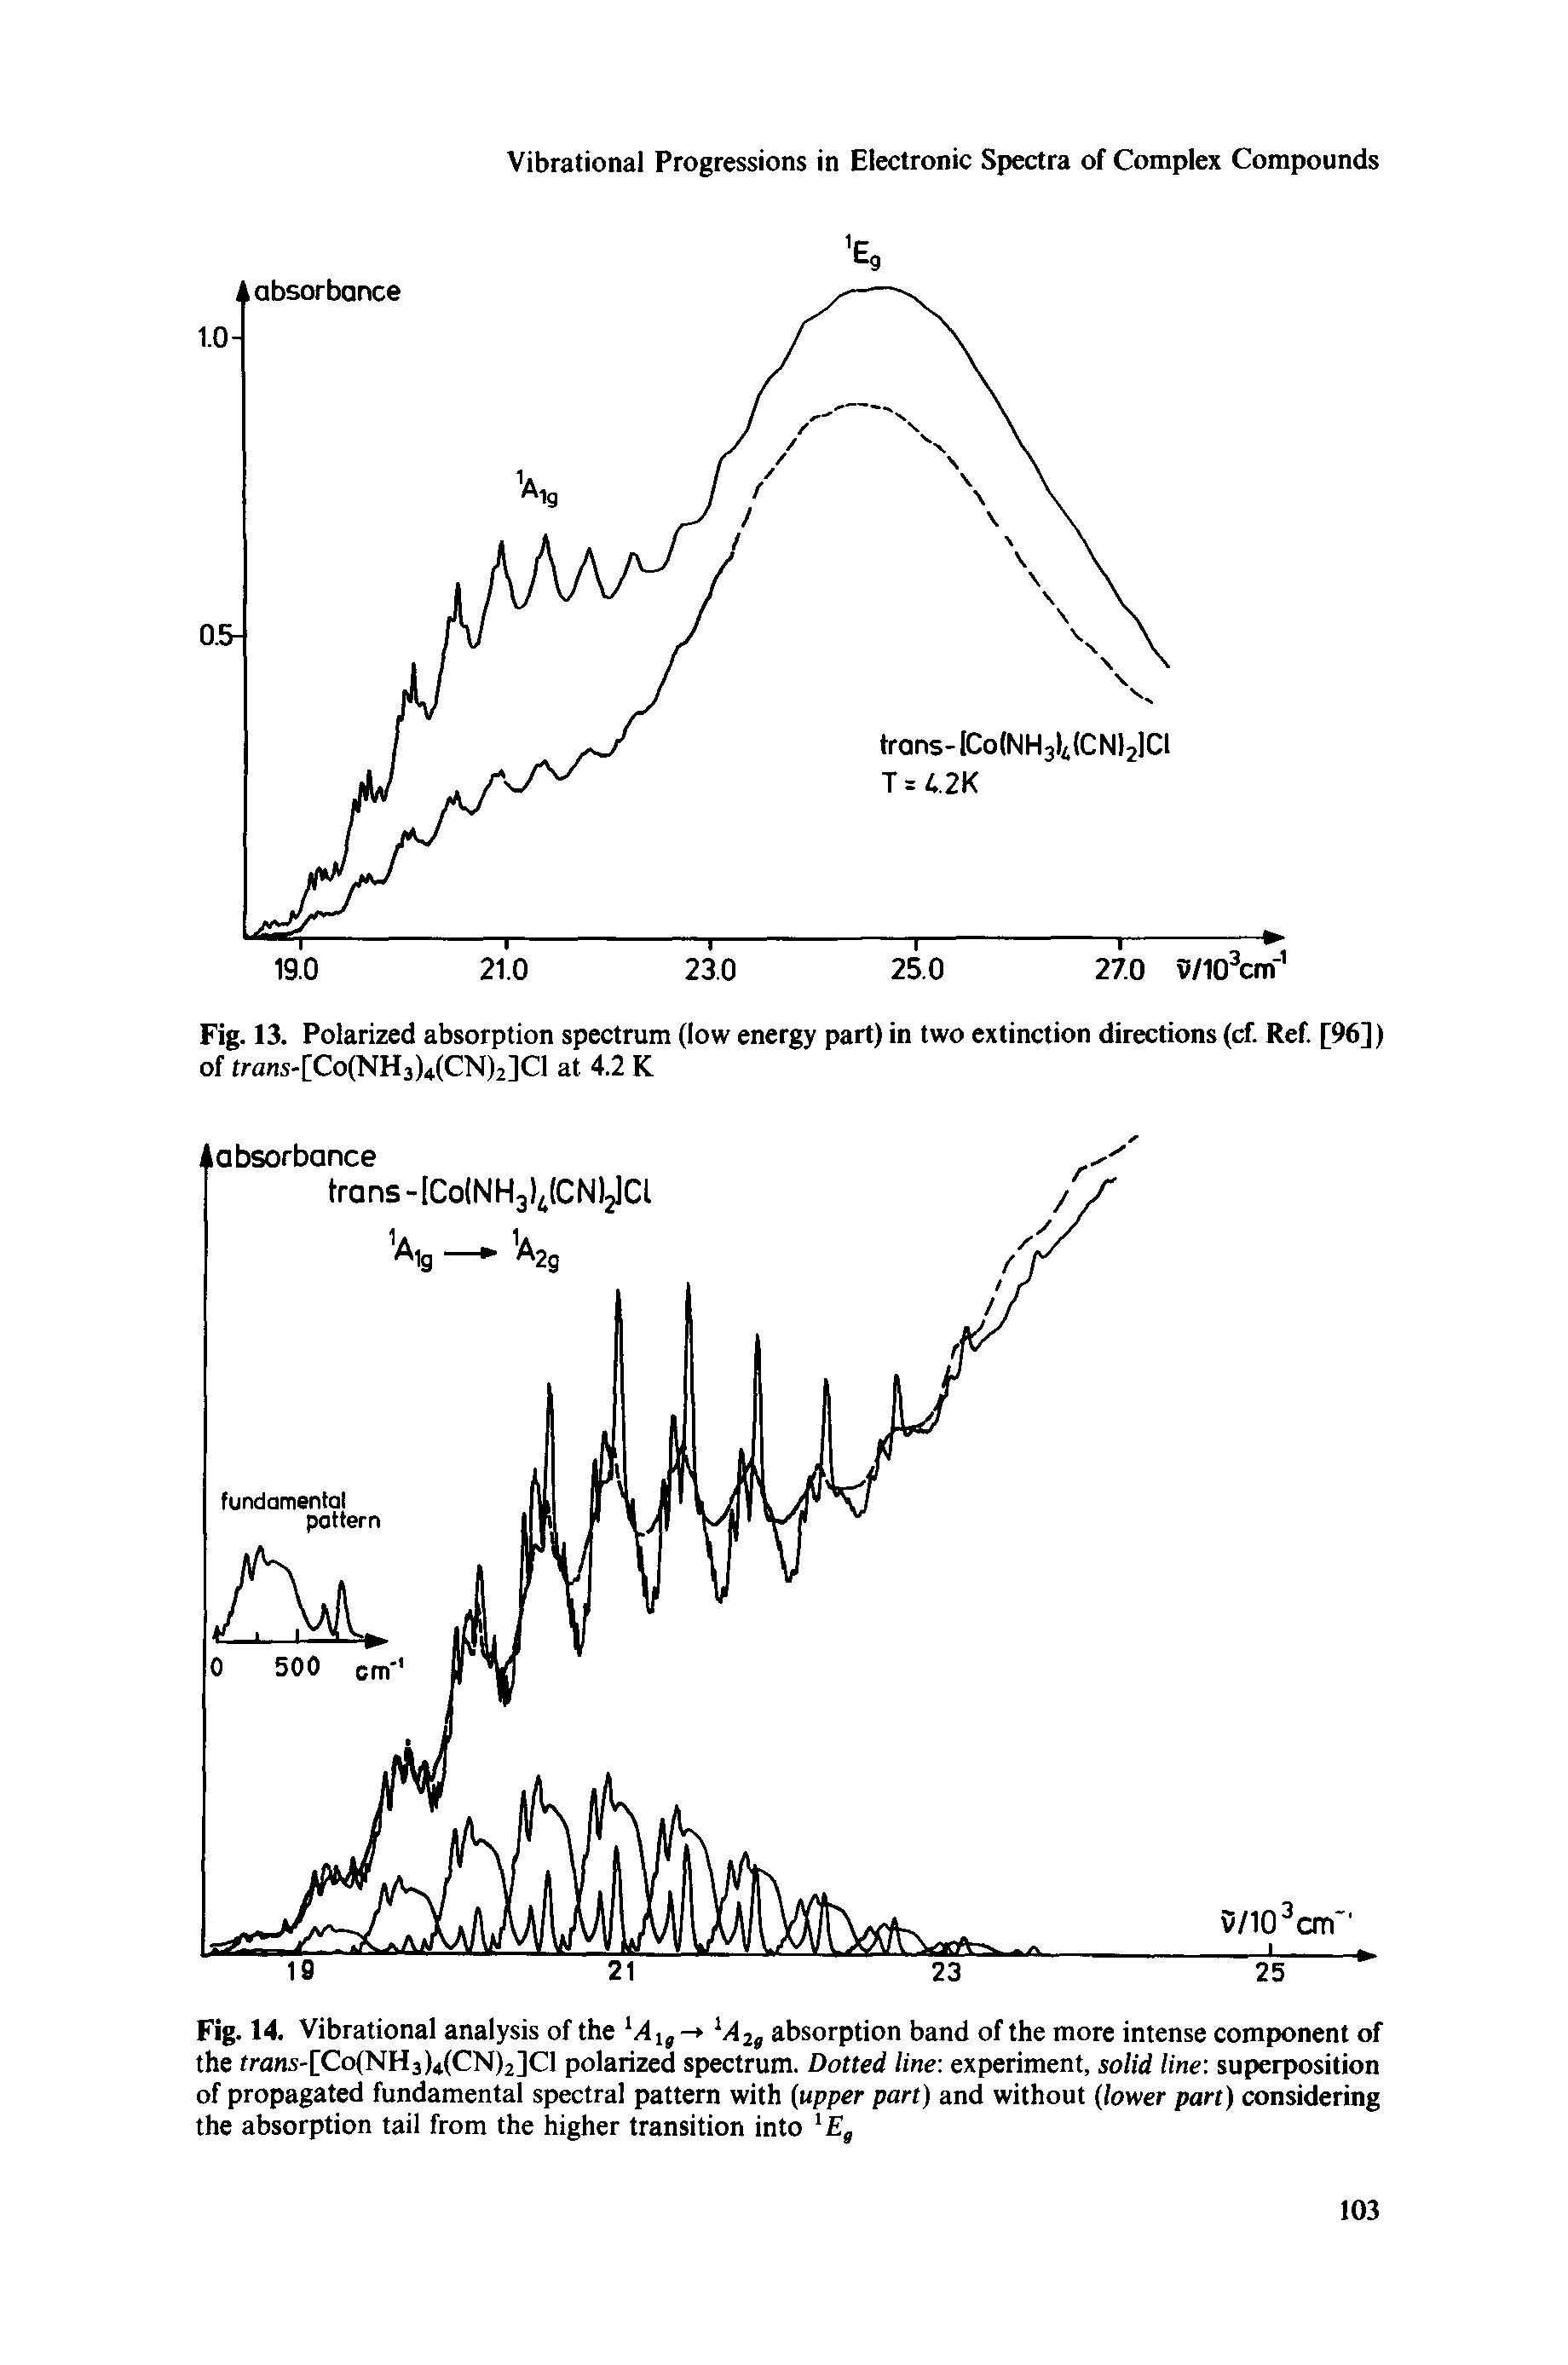 Fig. 14. Vibrational analysis of the lAlg - iAlg absorption band of the more intense component of the trans-[Co(NH3)4(CN)2]Cl polarized spectrum. Dotted line experiment, solid line superposition of propagated fundamental spectral pattern with (upper part) and without (lower part) considering the absorption tail from the higher transition into lEg...